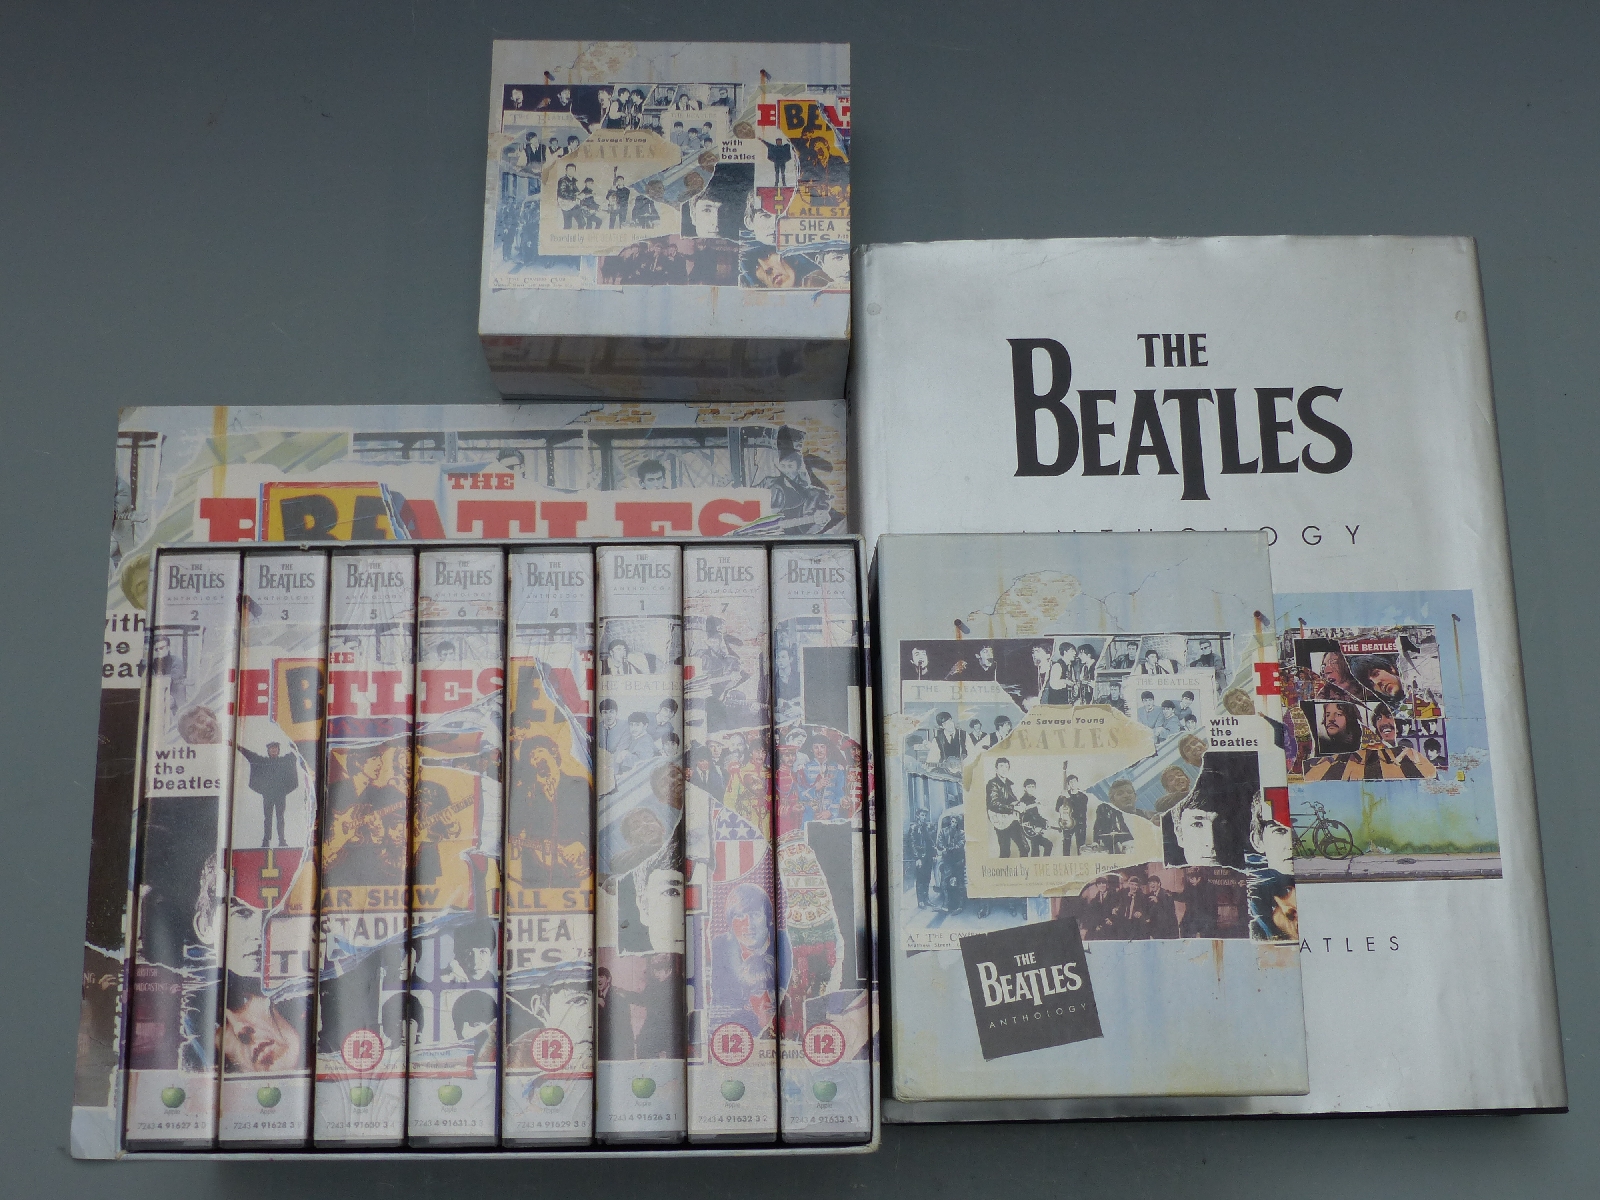 The Beatles - anthology  book, DVDs, CDs and videos